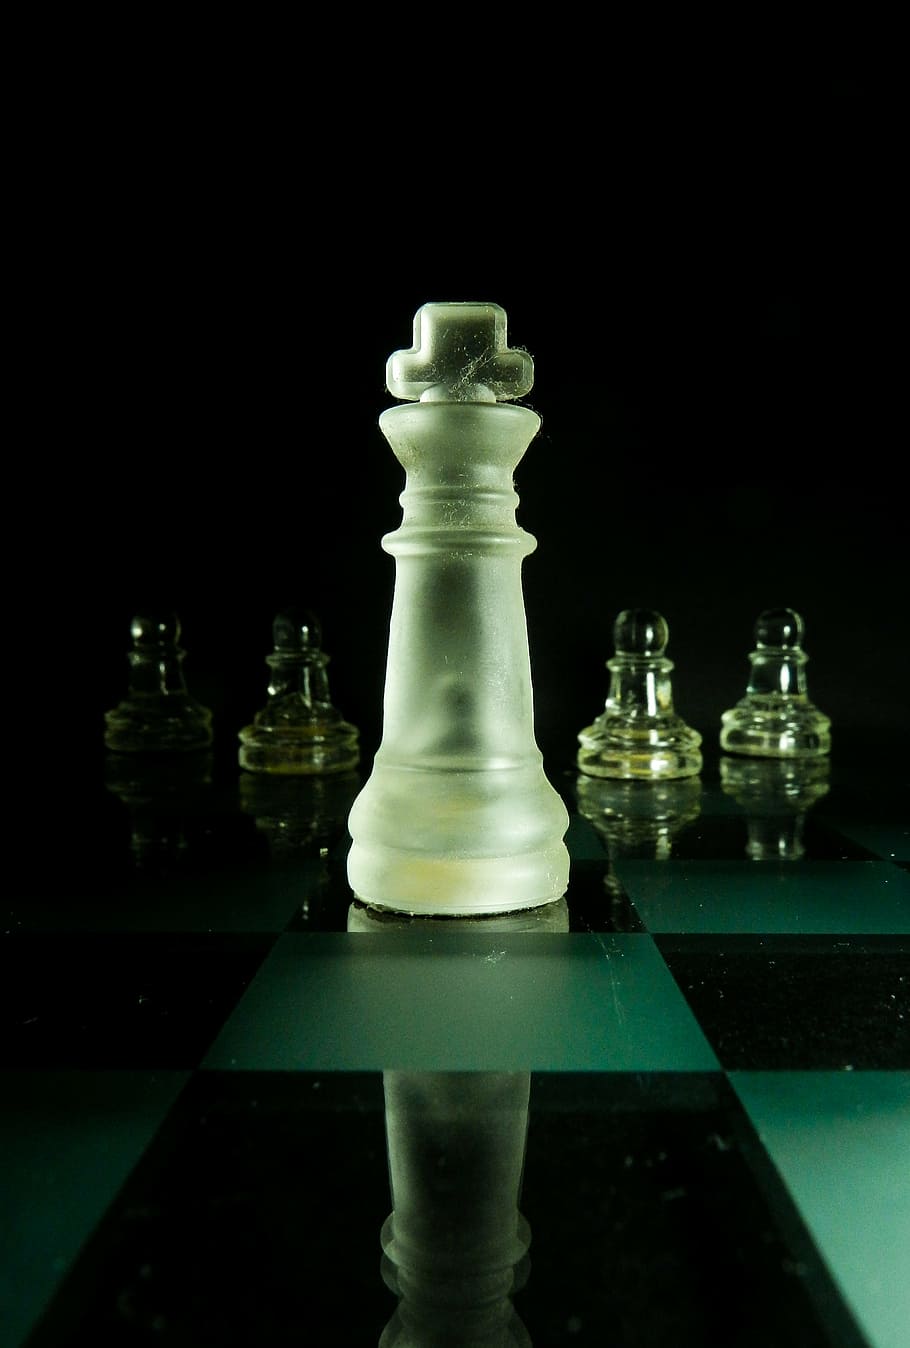 Premium Photo  Chess pawn and pieces on a board background